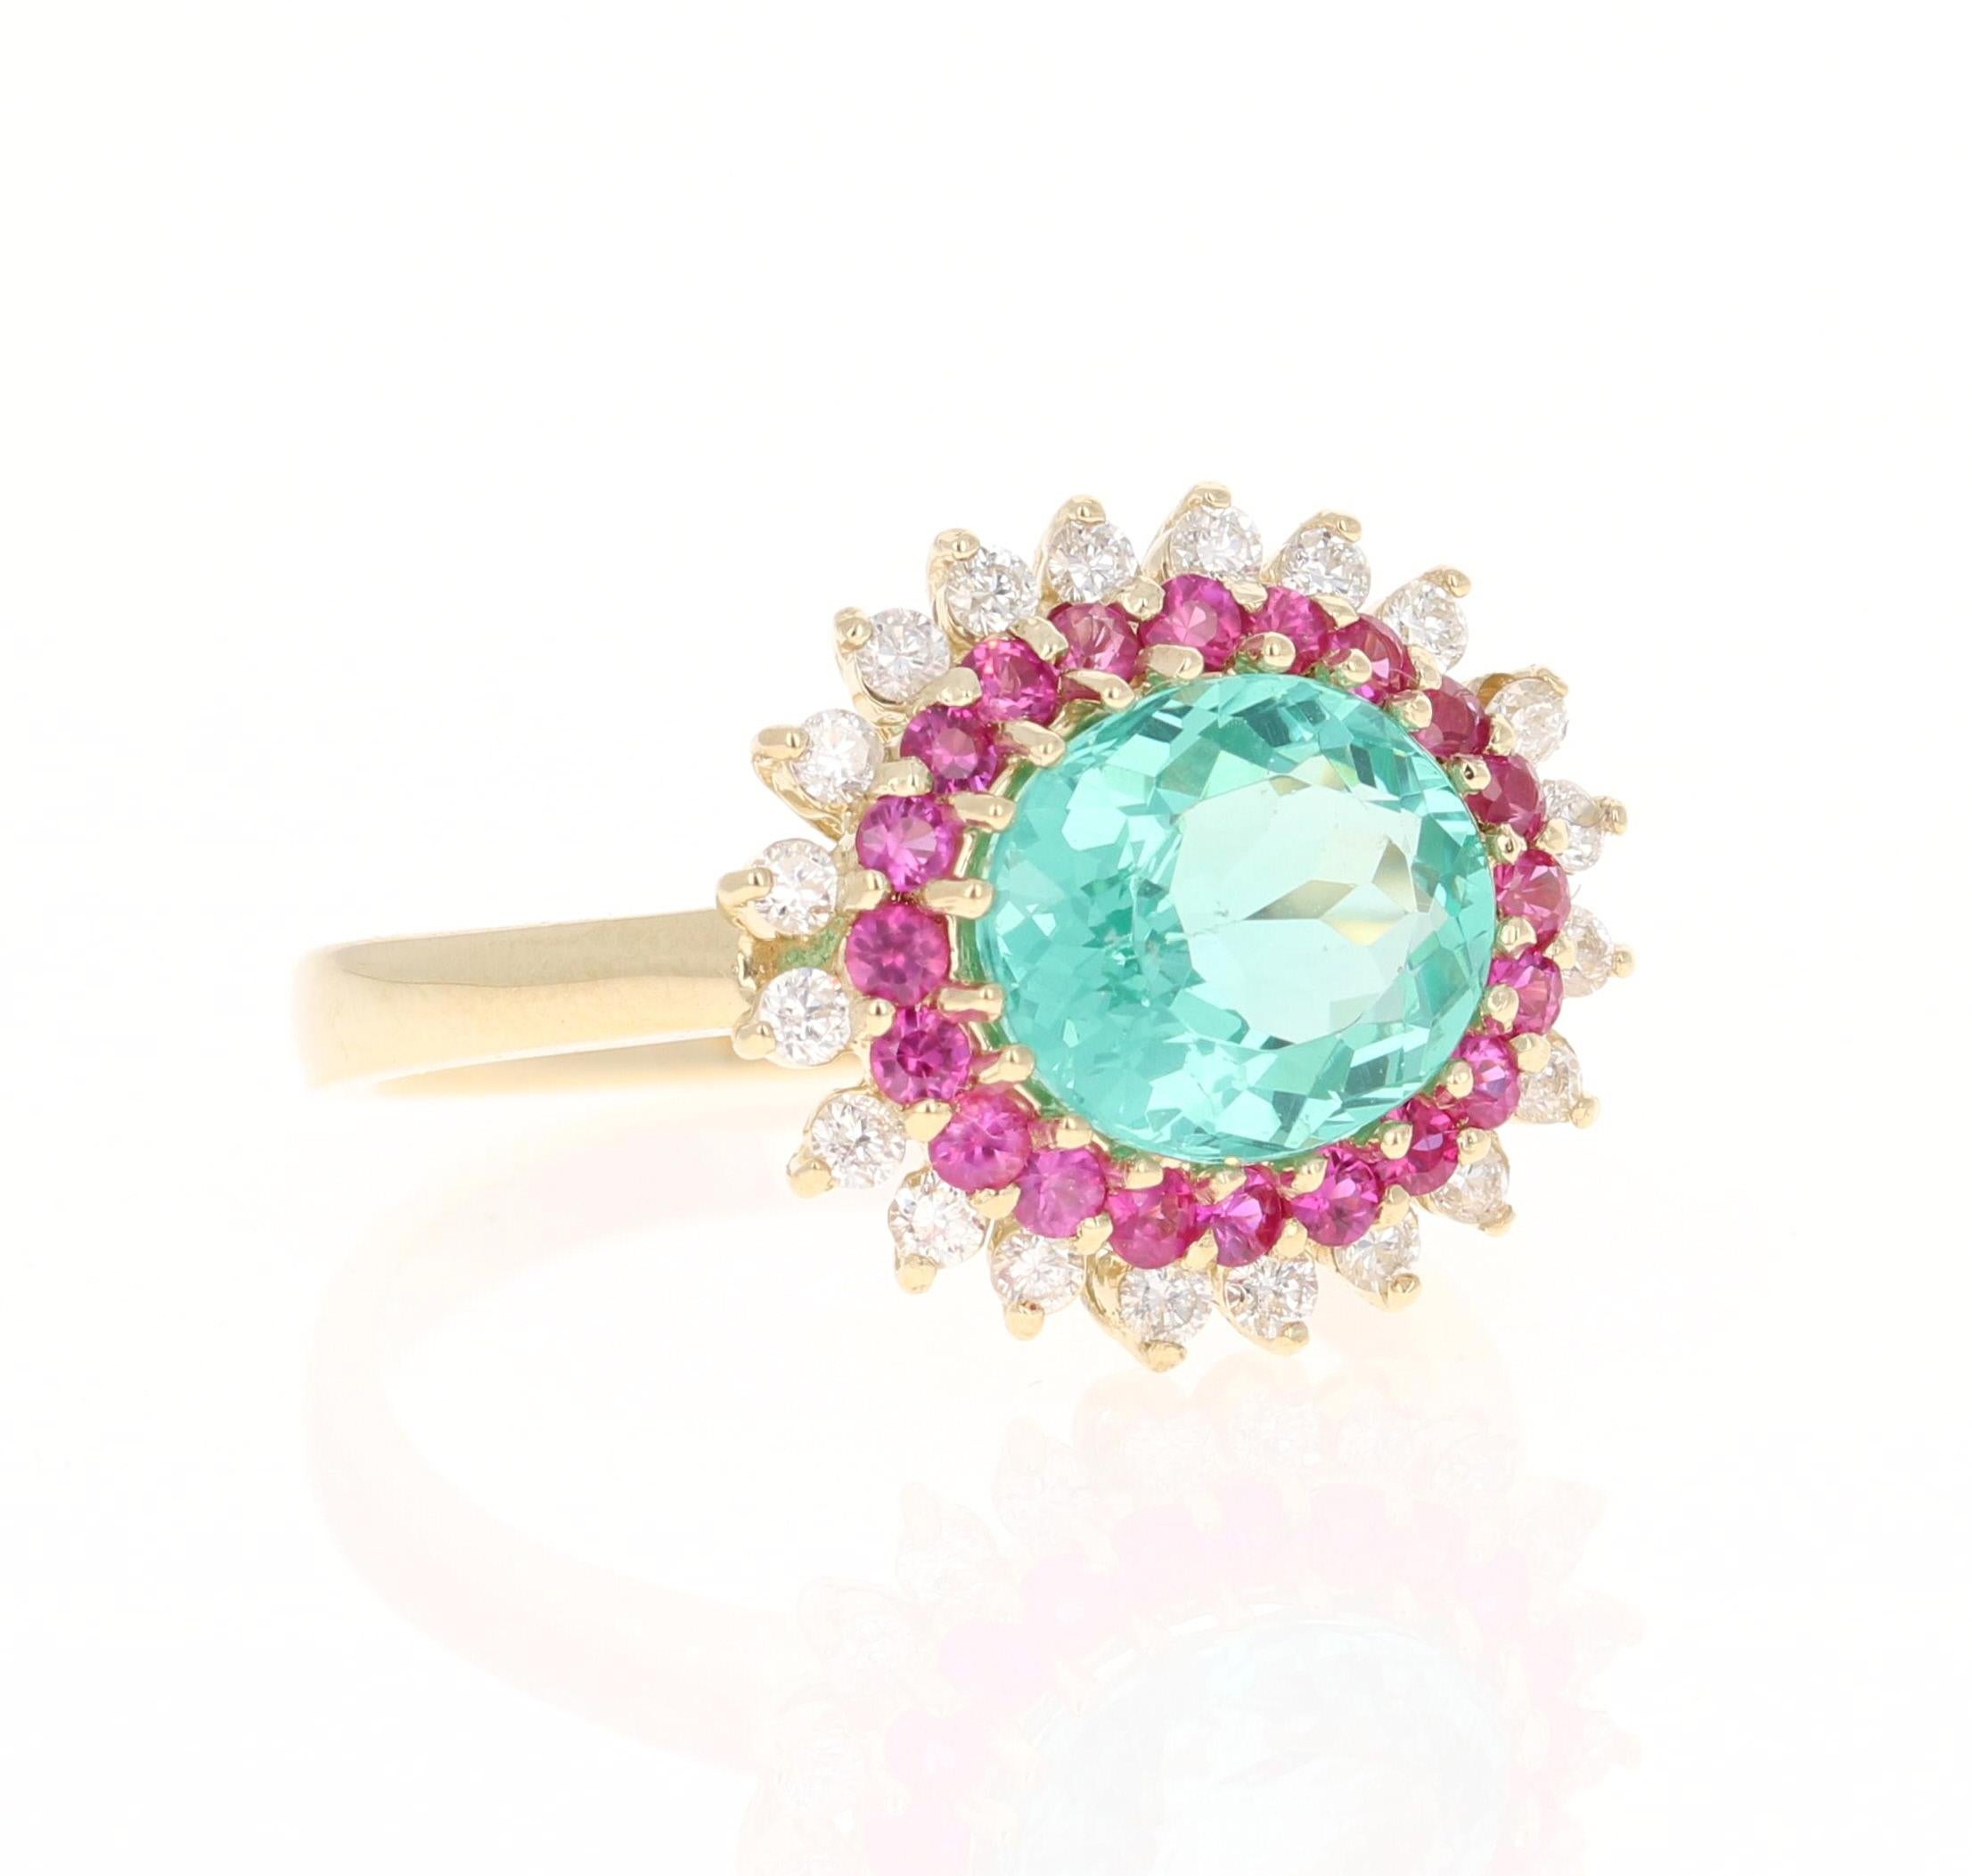 This ring has a 2.56 Carat Oval Cut Apatite in the center of the ring and is surrounded by 20 Pink Sapphires that weigh a total of 0.46 carats and 20 Round Cut Diamonds that weigh 0.33 Carats. The Clarity and Color of the Diamonds is SI-F. The total